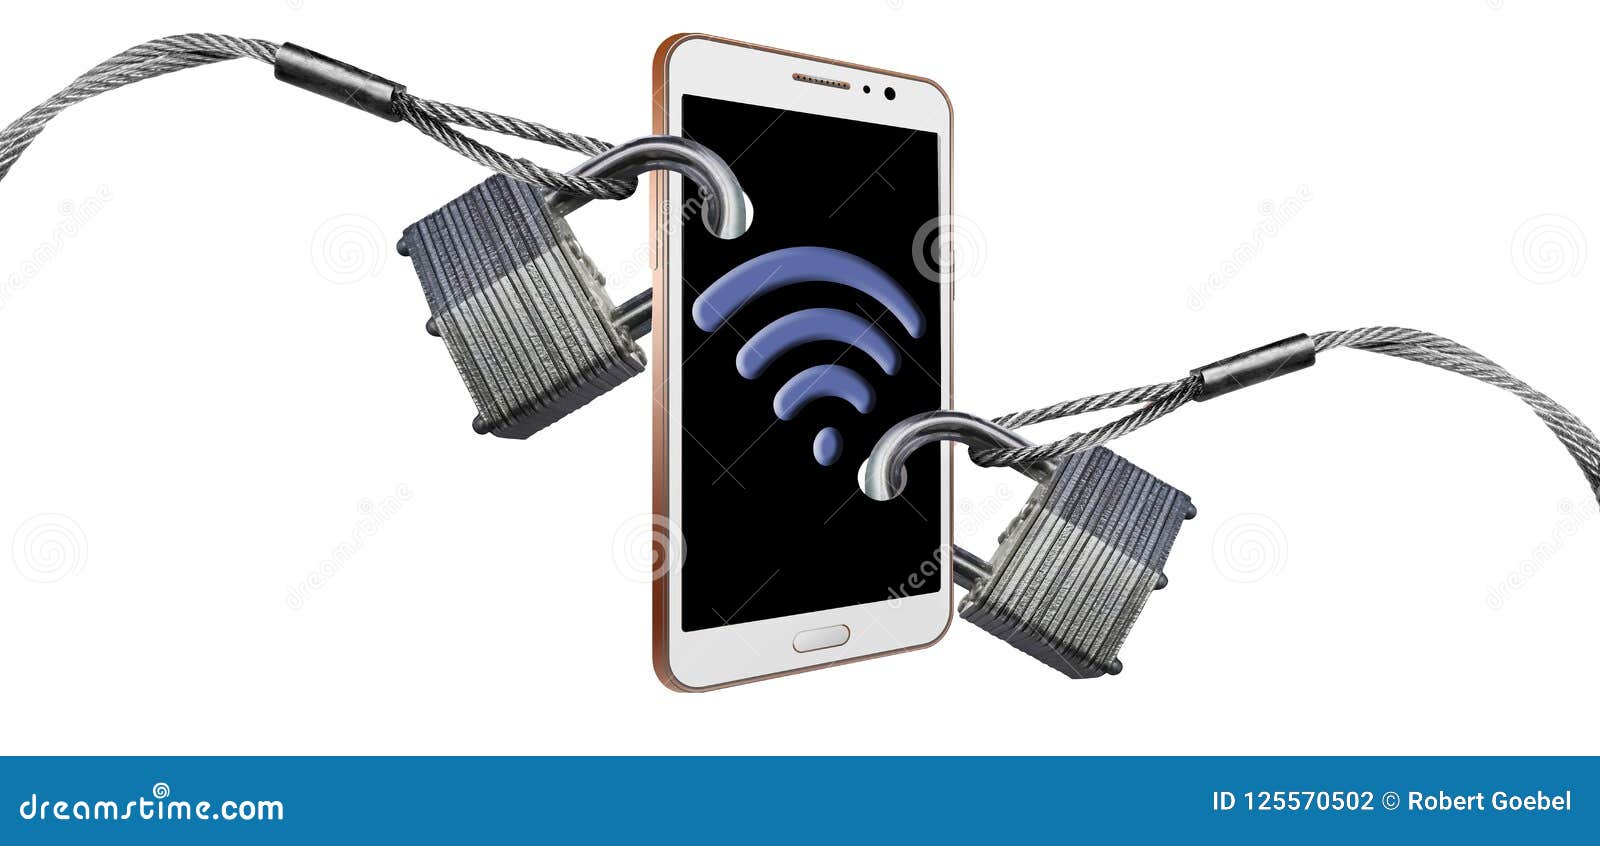 padlocks and steel cables securing a cell phone illustrates protecting your wireless and bluetooth signals.